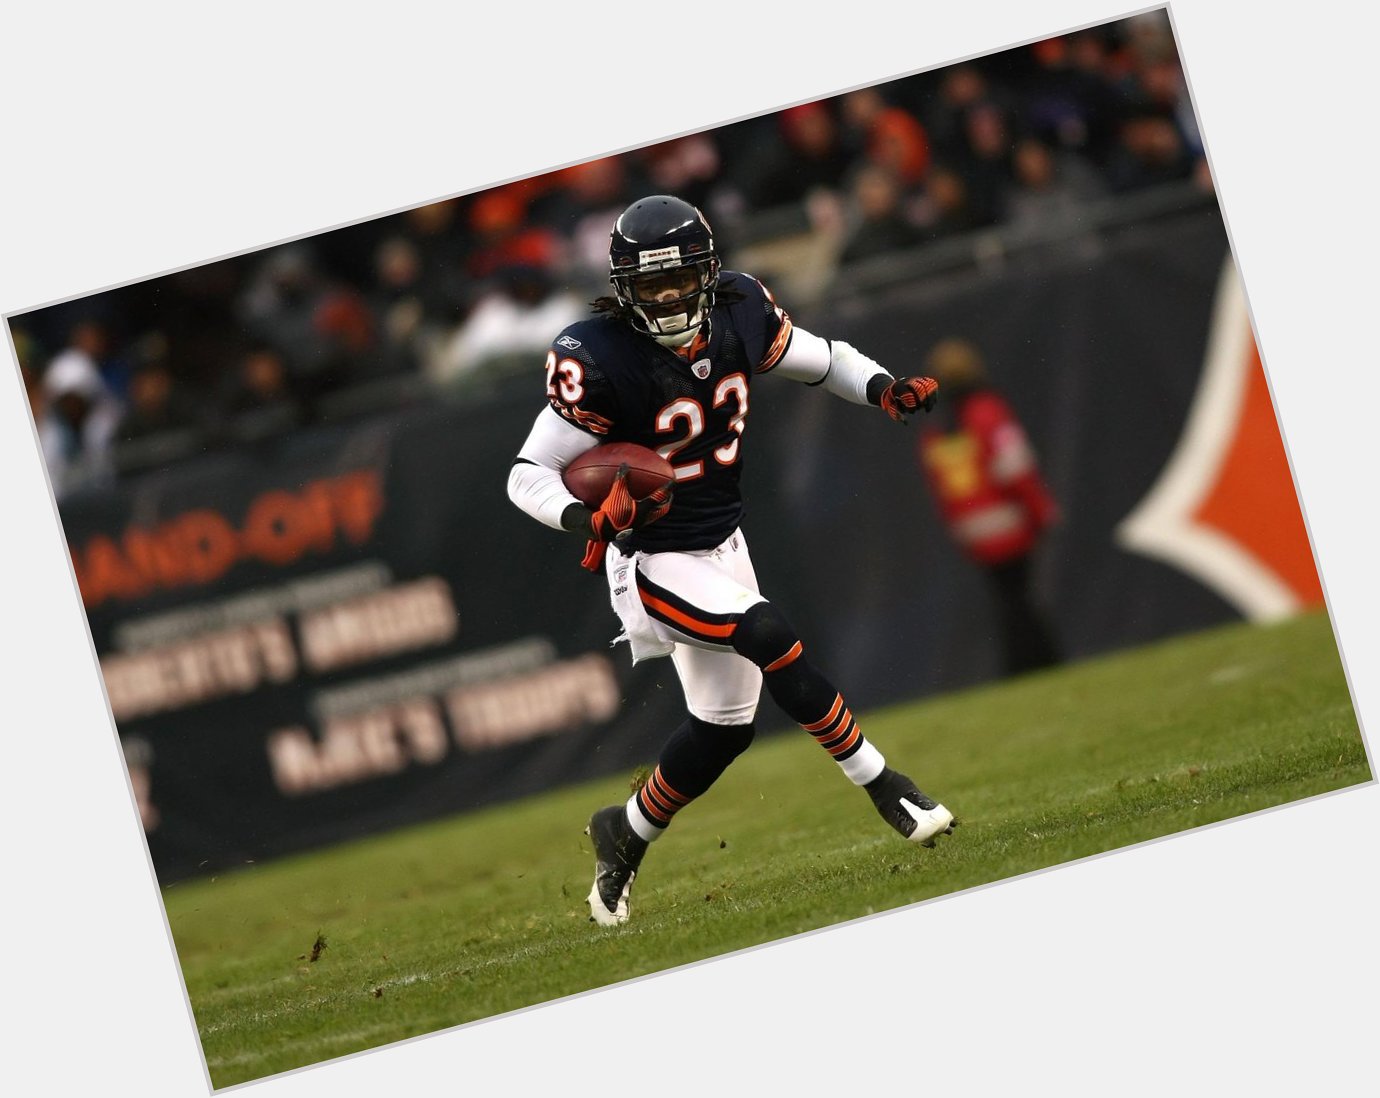 Happy Birthday to Devin Hester, who turns 33 today! 